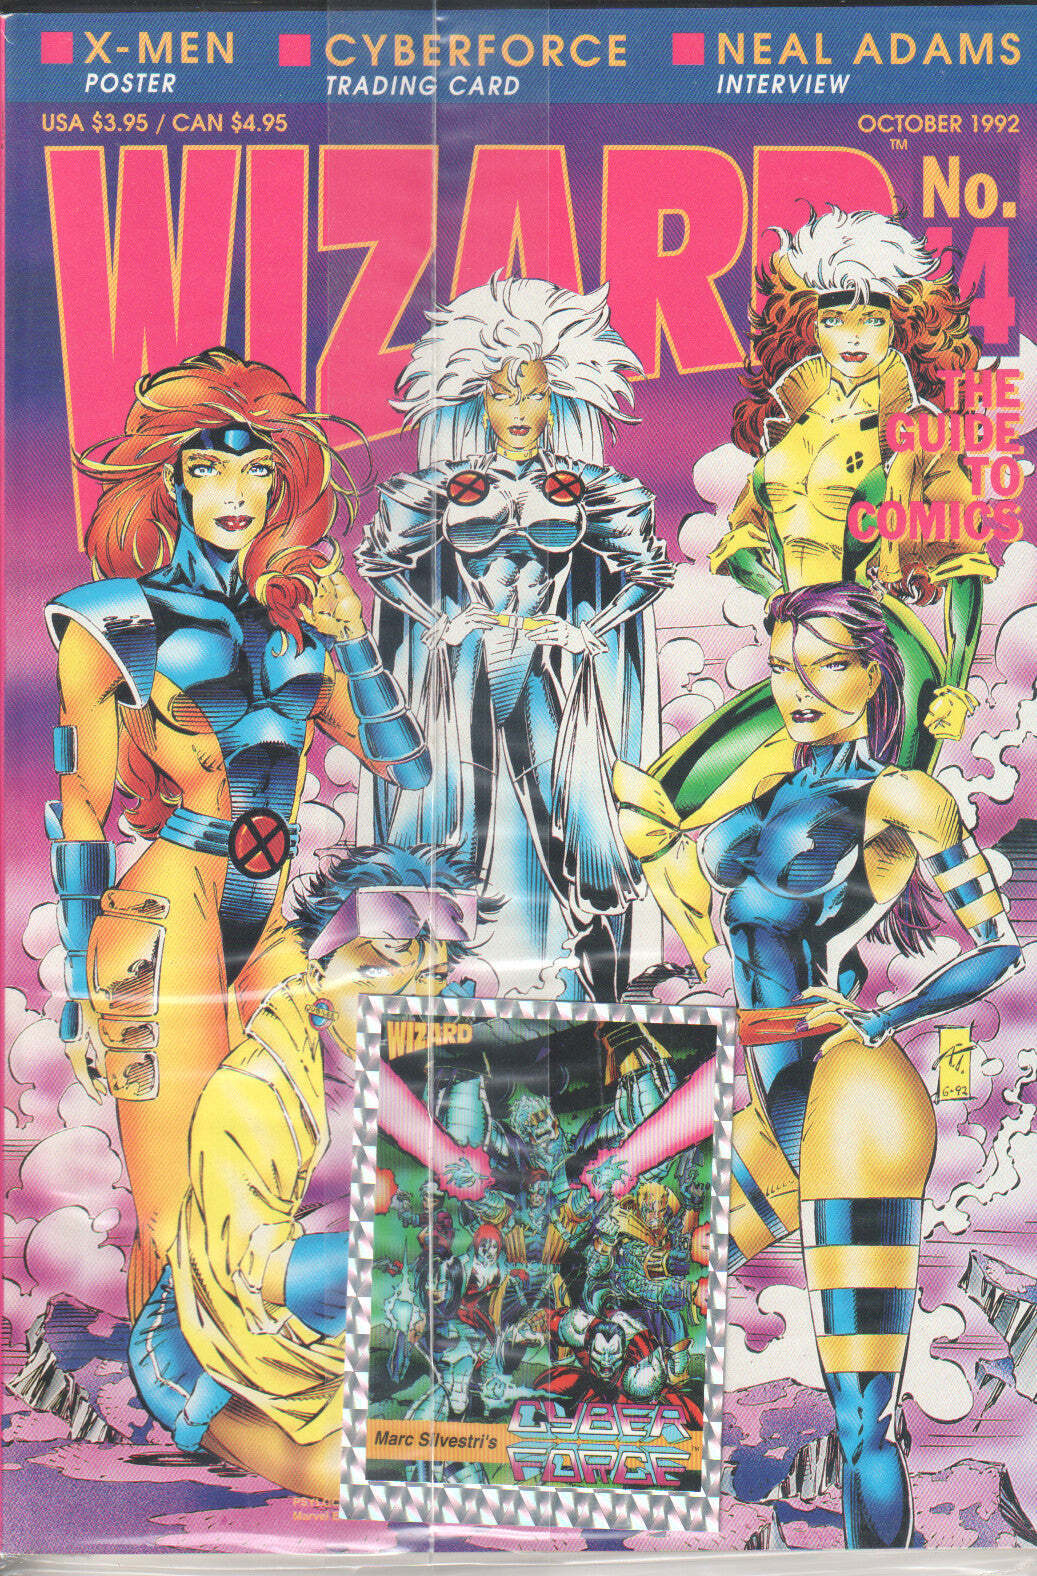 Wizard Magazine #14 October 1992 Sealed with Card